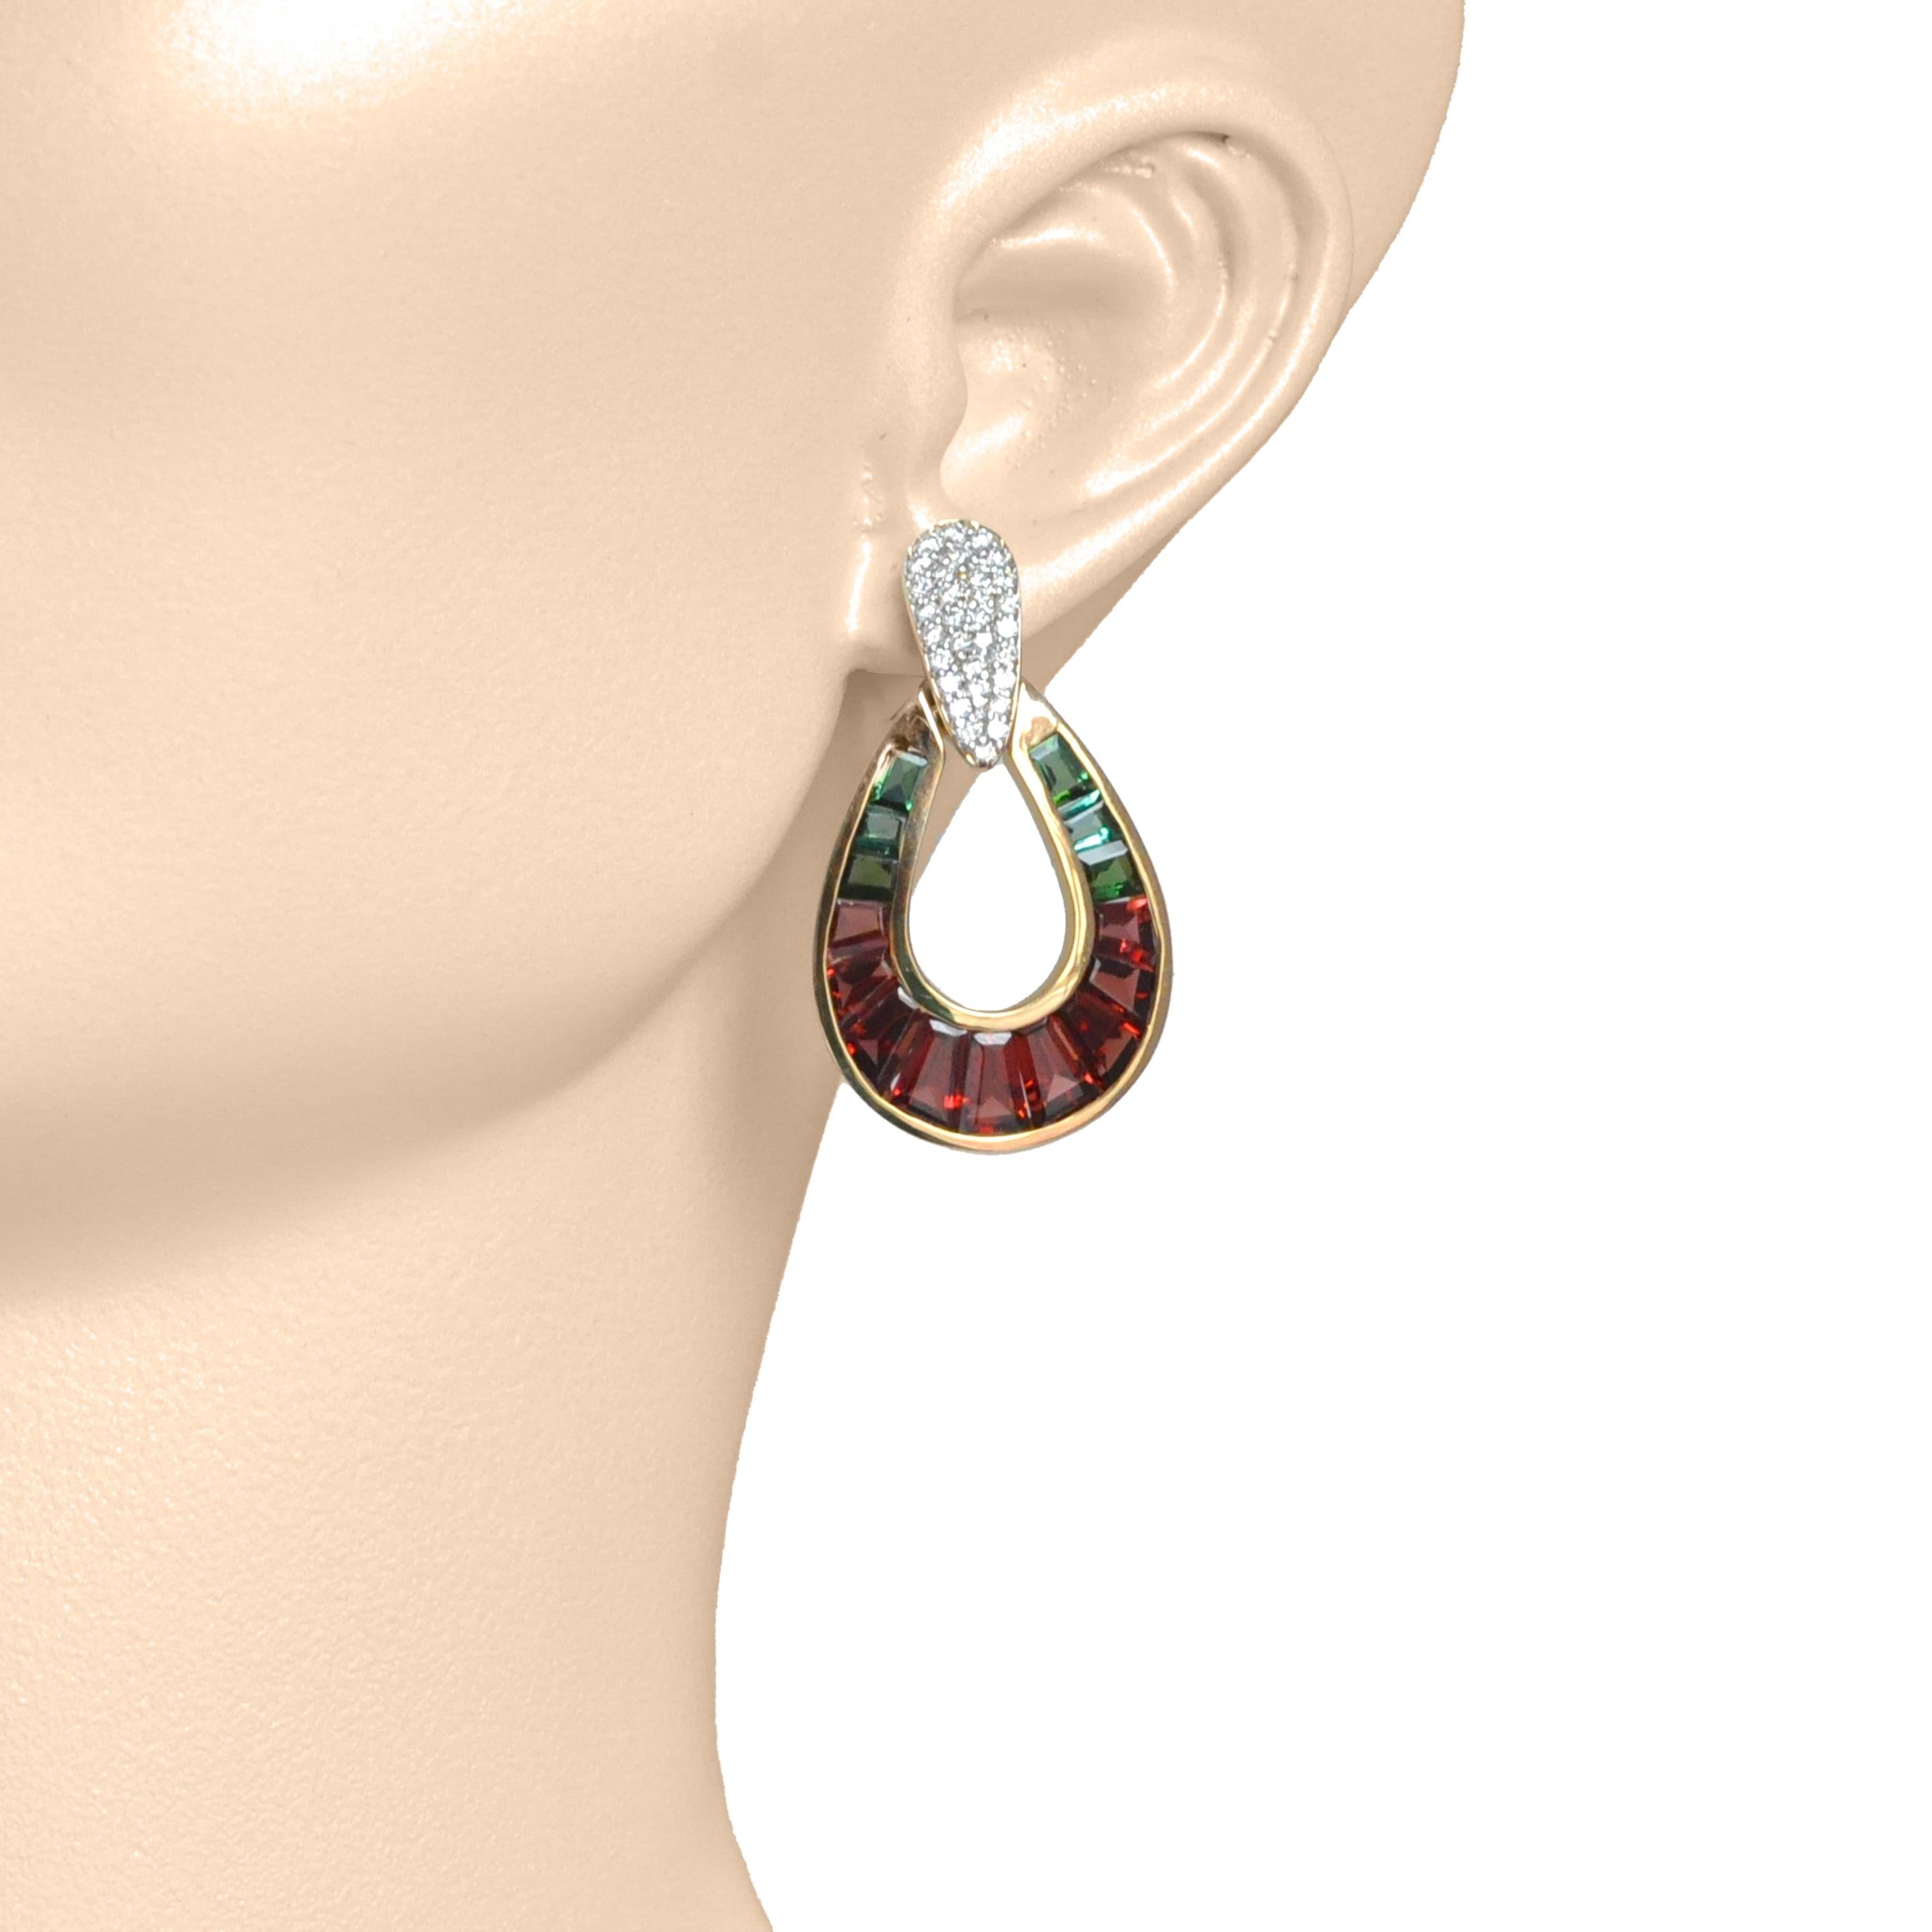 18k gold garnet green tourmaline diamond raindrop earrings

Introducing our 18k gold garnet green tourmaline diamond raindrop earrings—a fusion of elegance and brilliance, designed to captivate.

Handcrafted with precision and using the finest